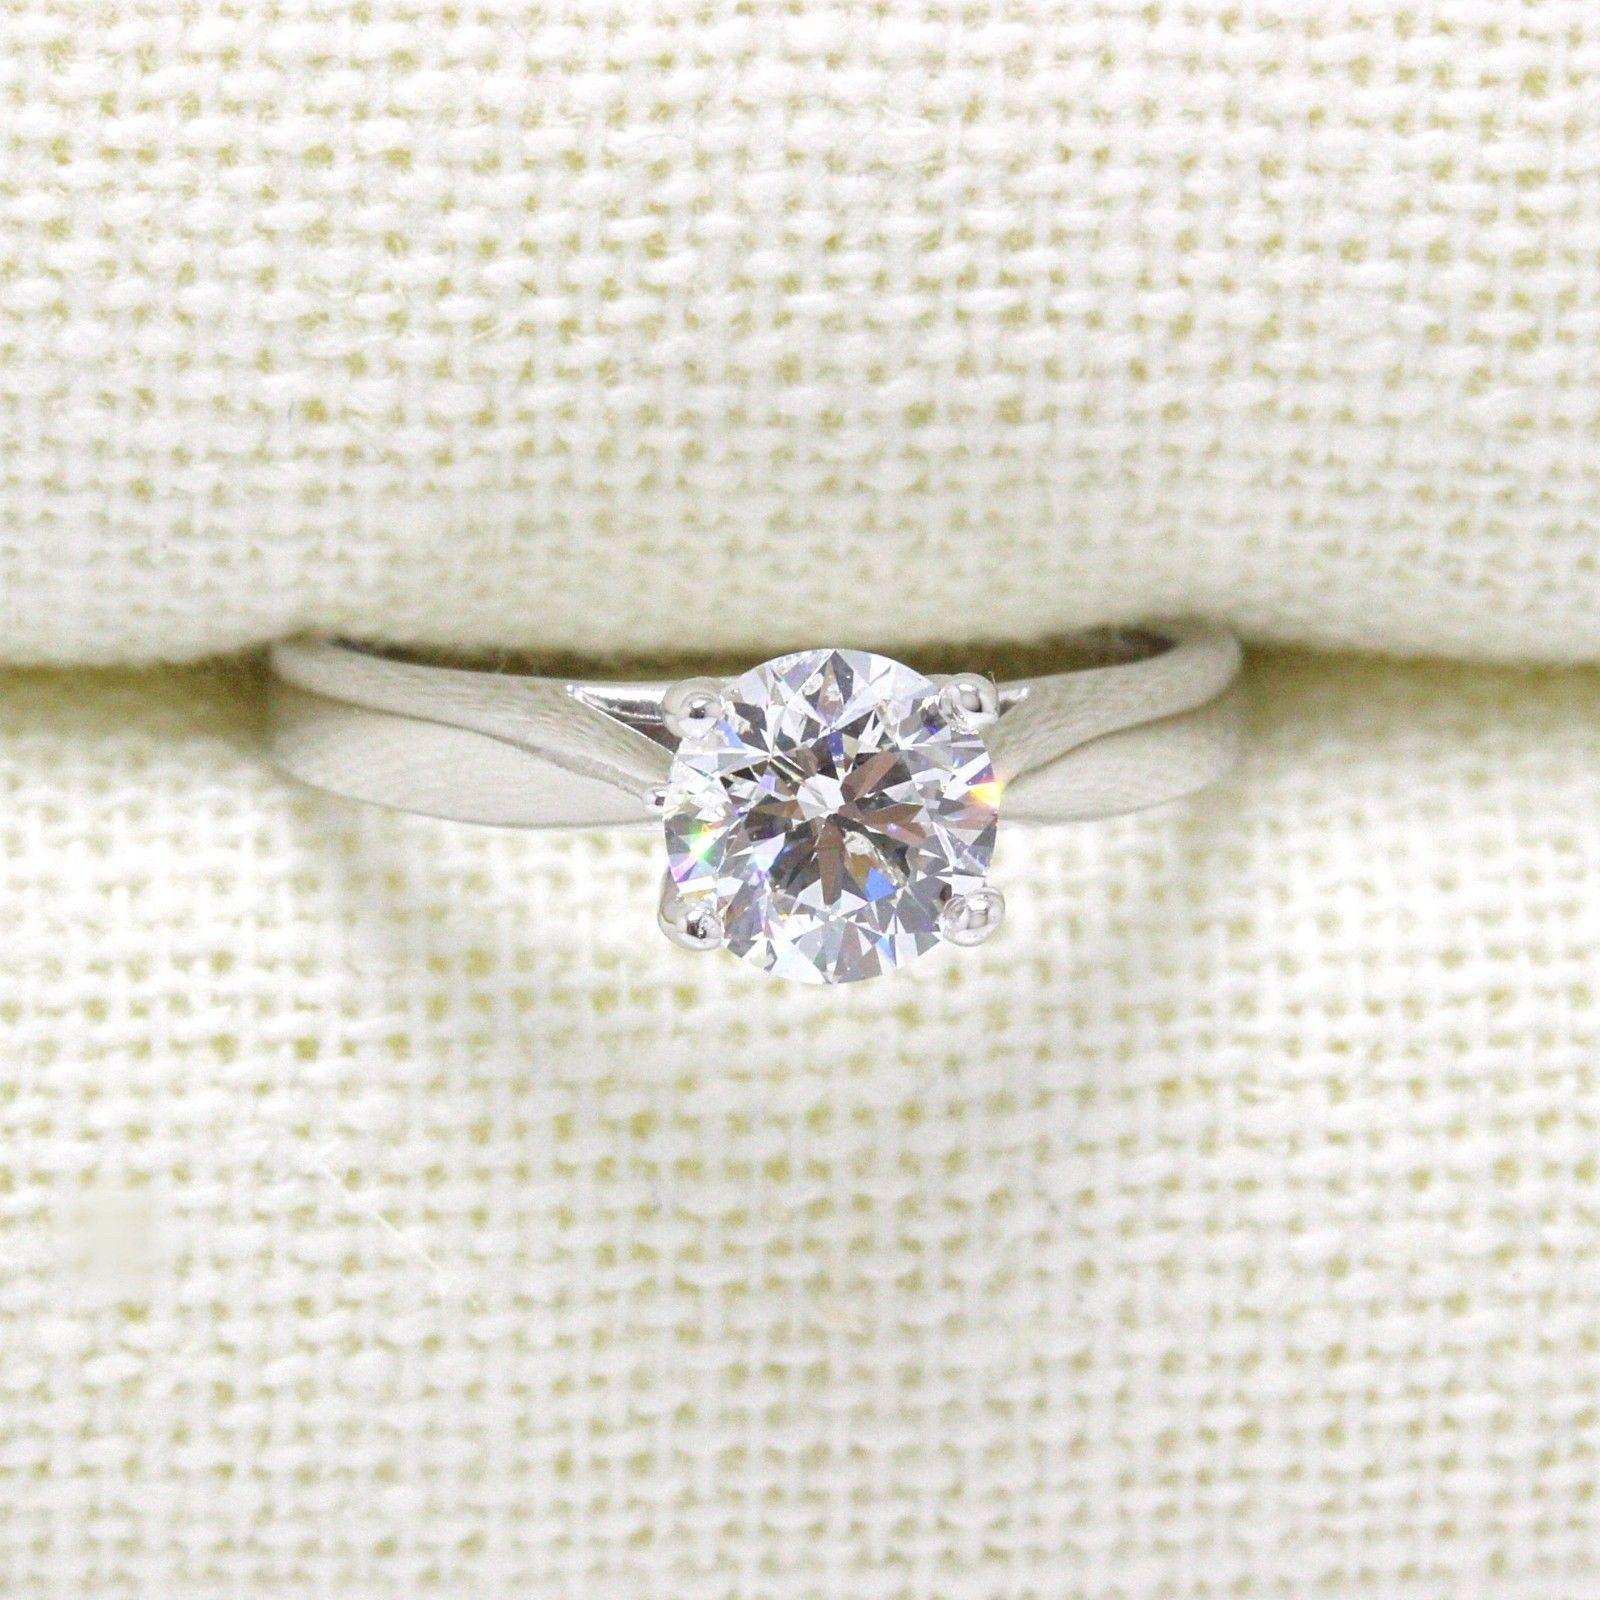 Celebration Grand Diamond Engagement Ring Round 1.04 Cts H I1 14k White Gold In Excellent Condition For Sale In San Diego, CA